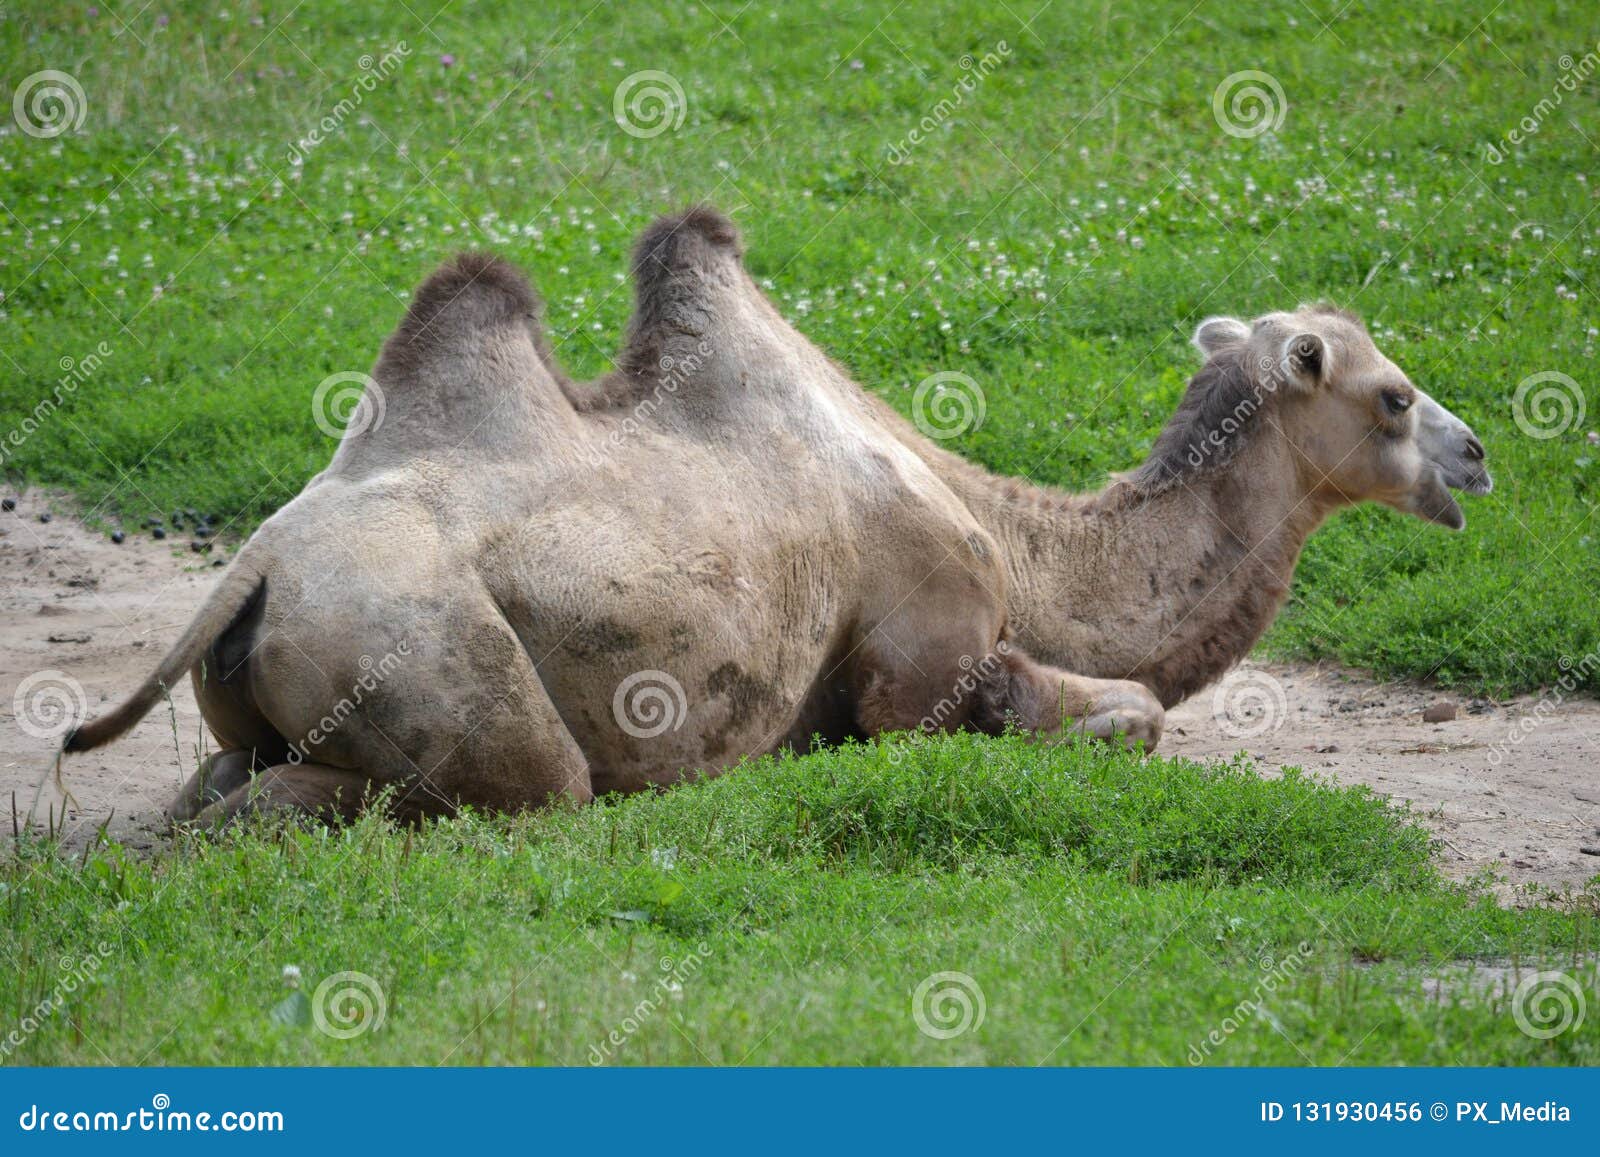 Camel laying on a grass stock photo. Image of wildlife - 131930456